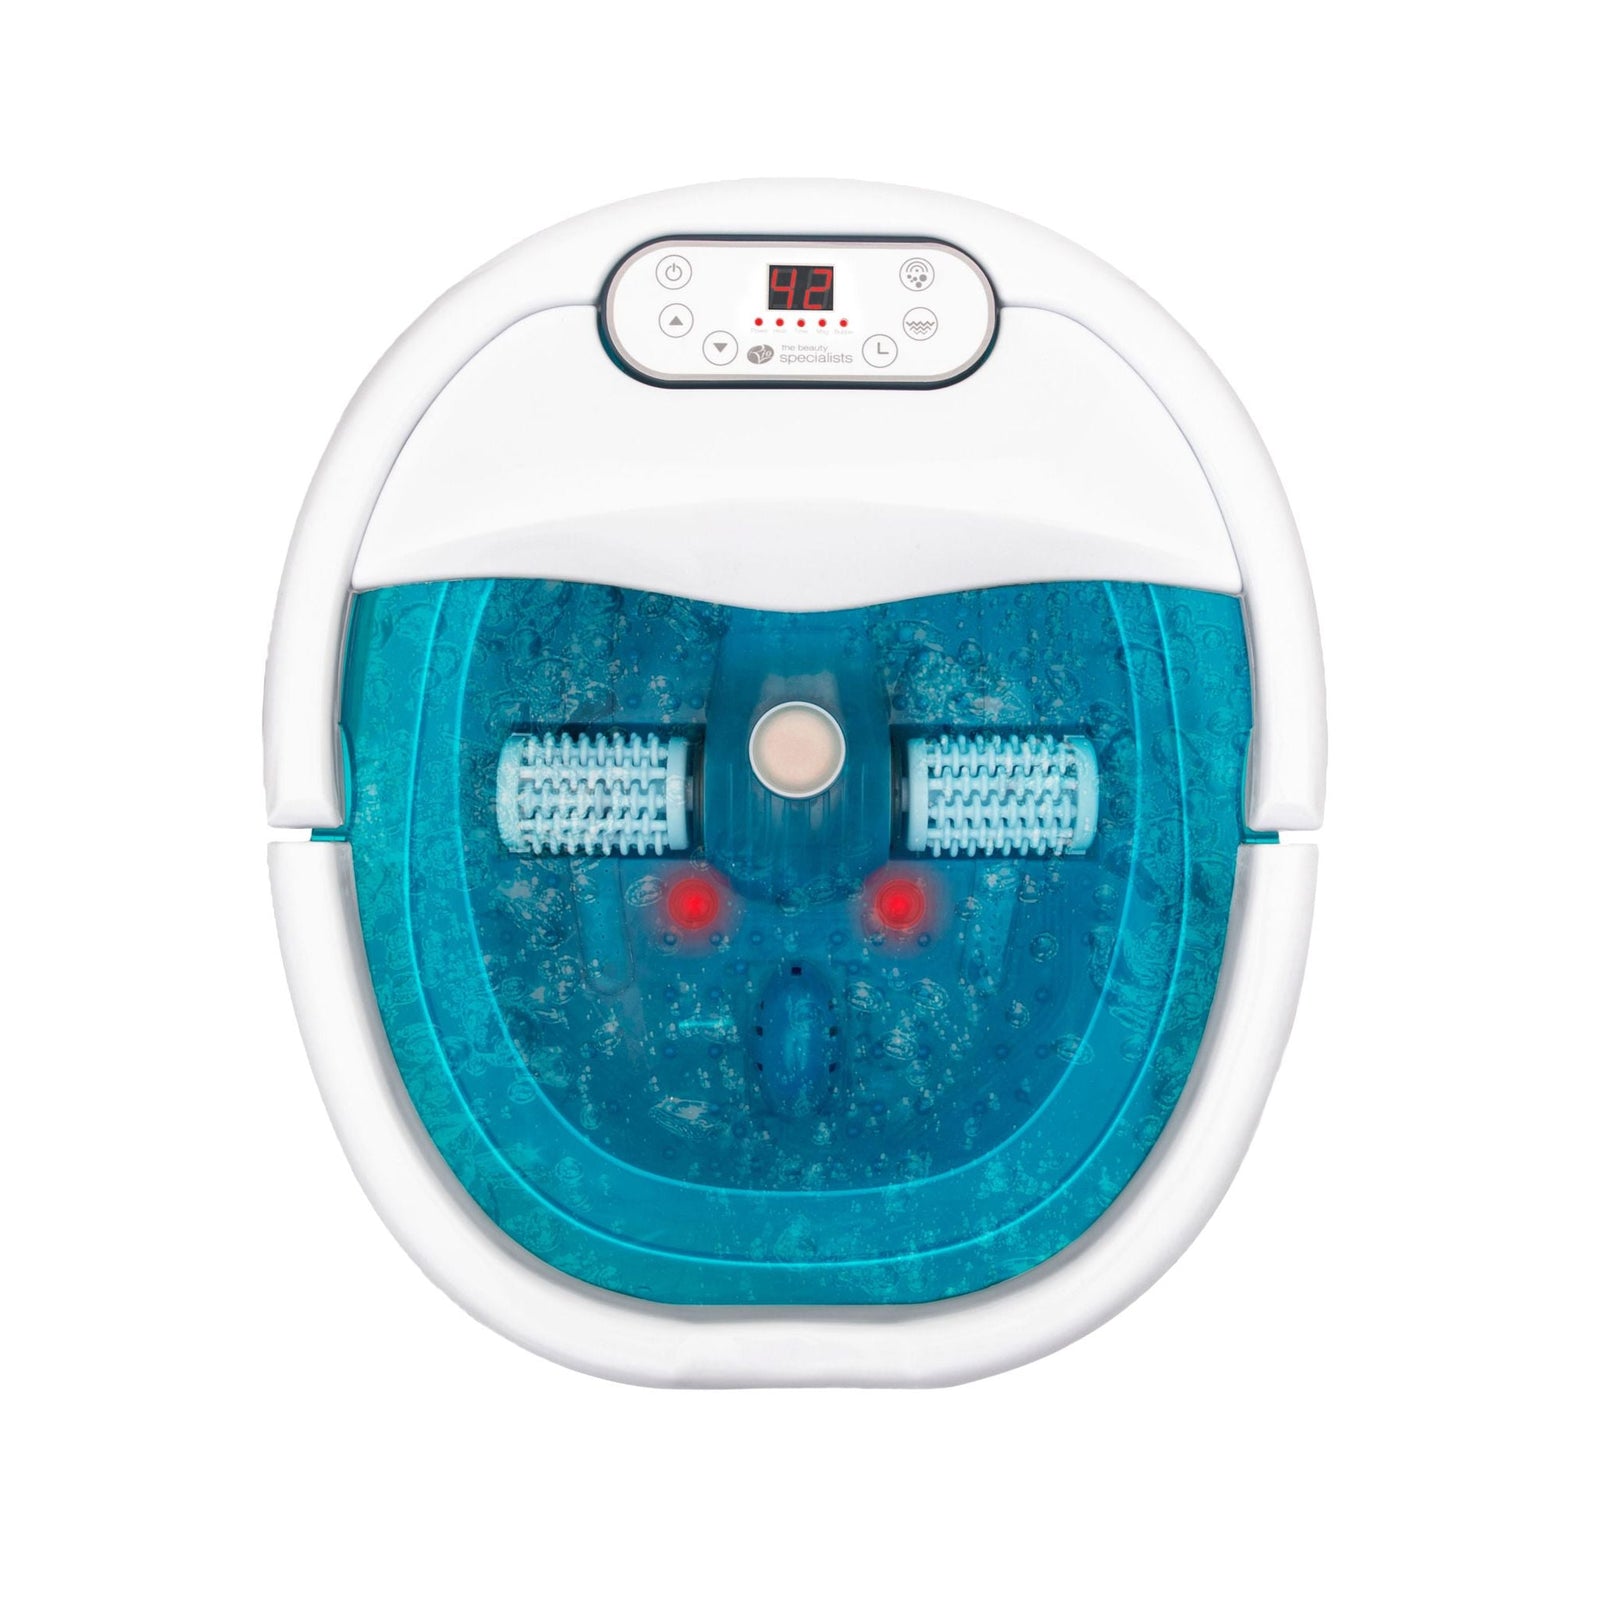 Birdseye view of multi-functional motorised foot spa bath and massager